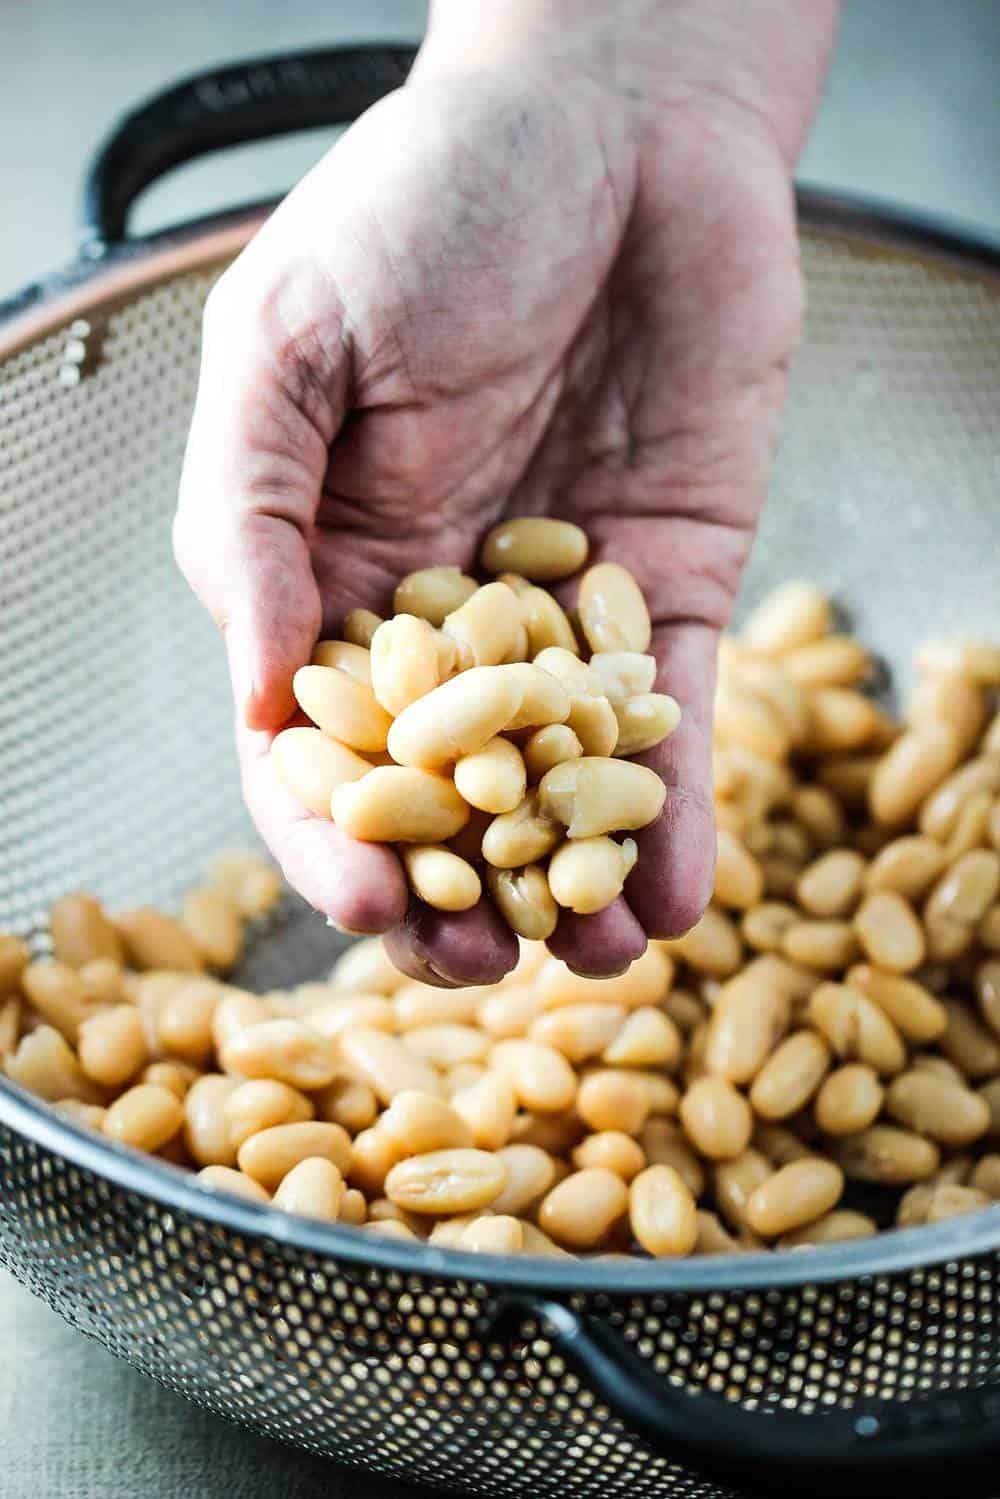 A hand holding white beans for white chili with roasted tomatillos